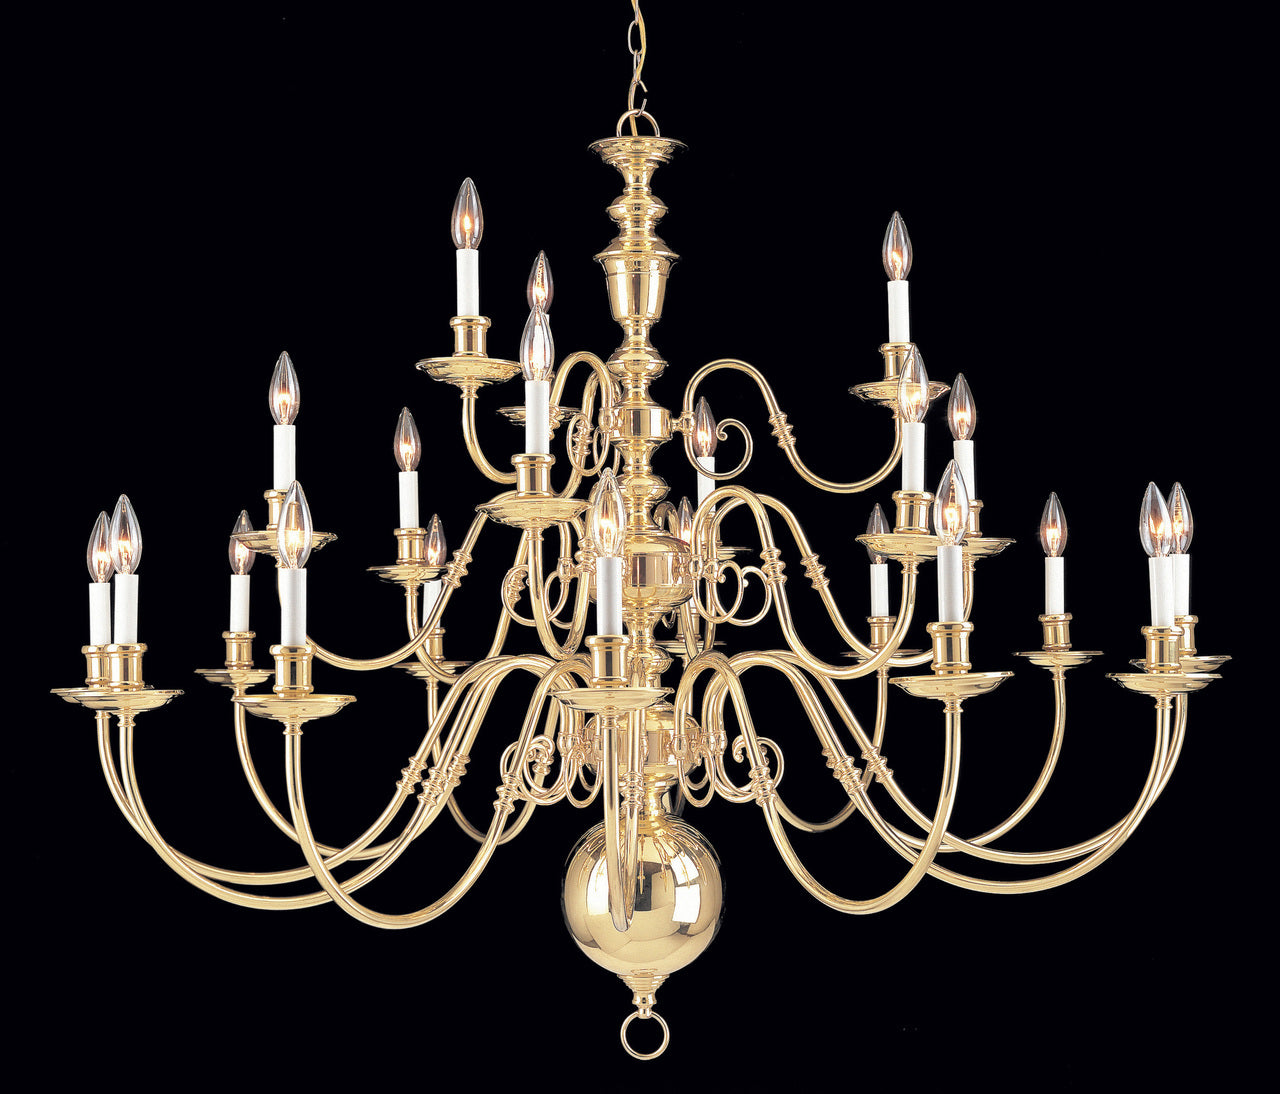 Classic Lighting 6737 Jamestown Traditional Chandelier in Polished Brass